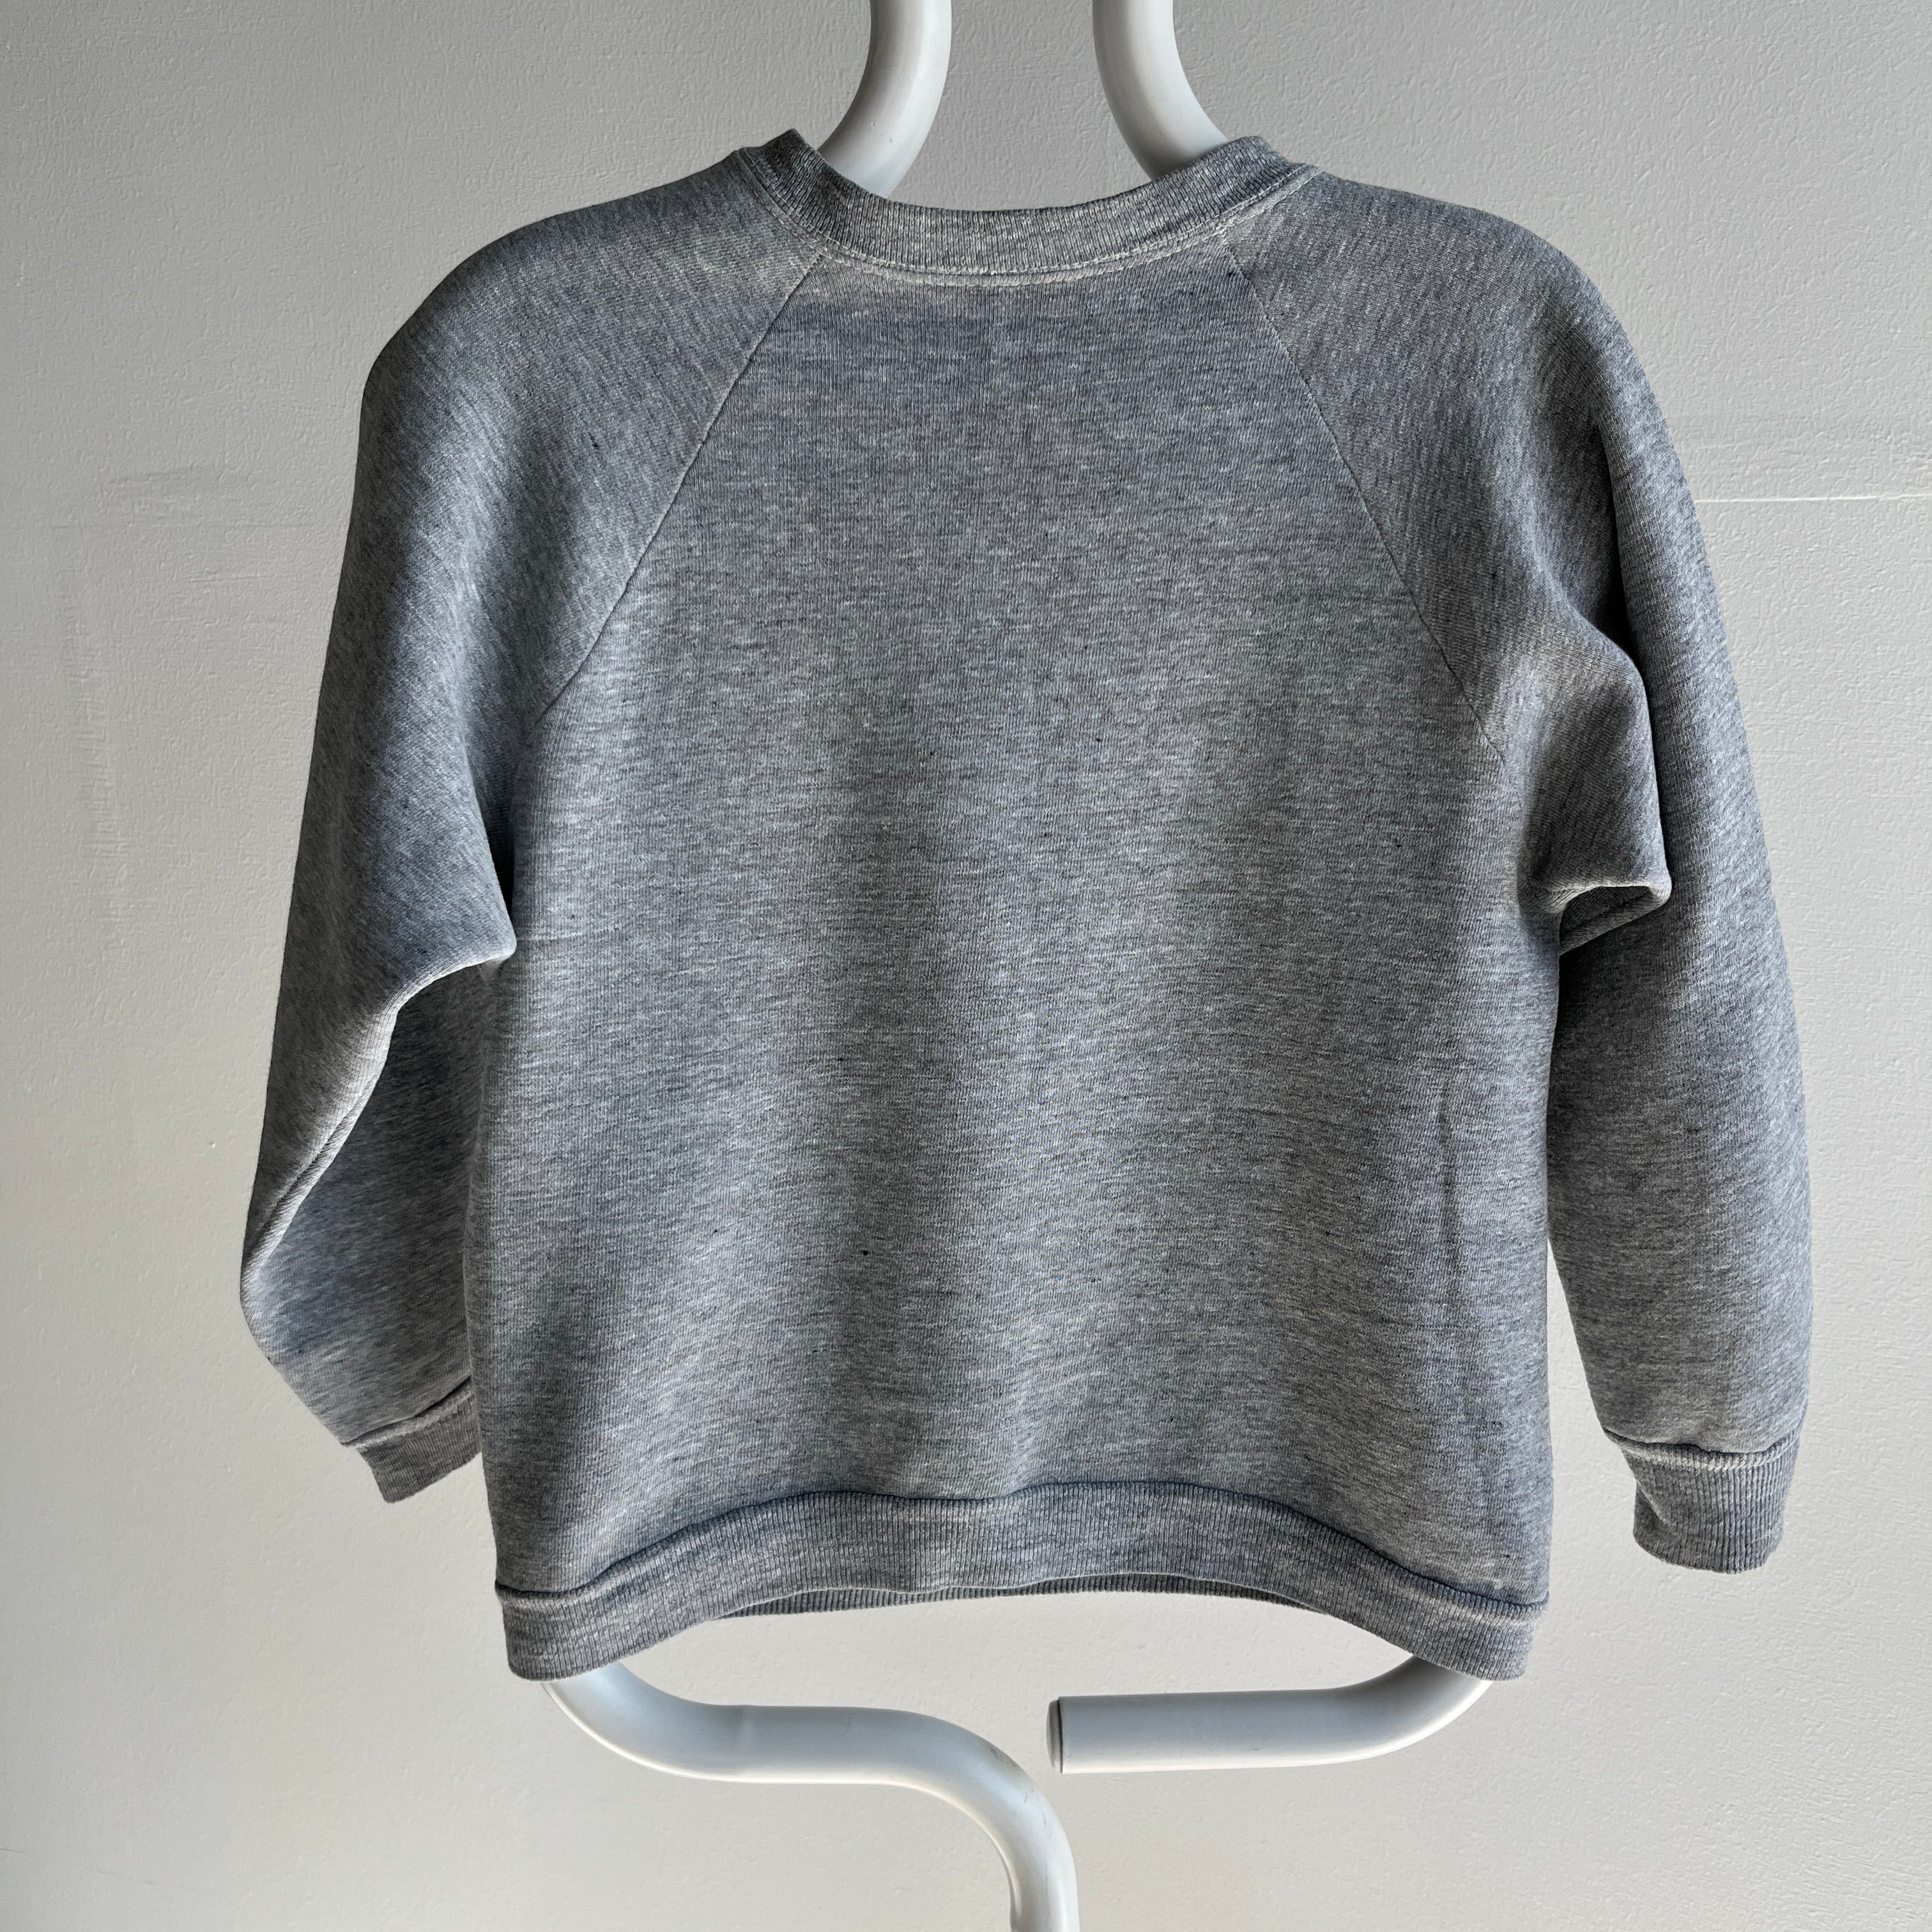 1970s Smaller Russell Brand Blank Gray Sweatshirt - It has a stain